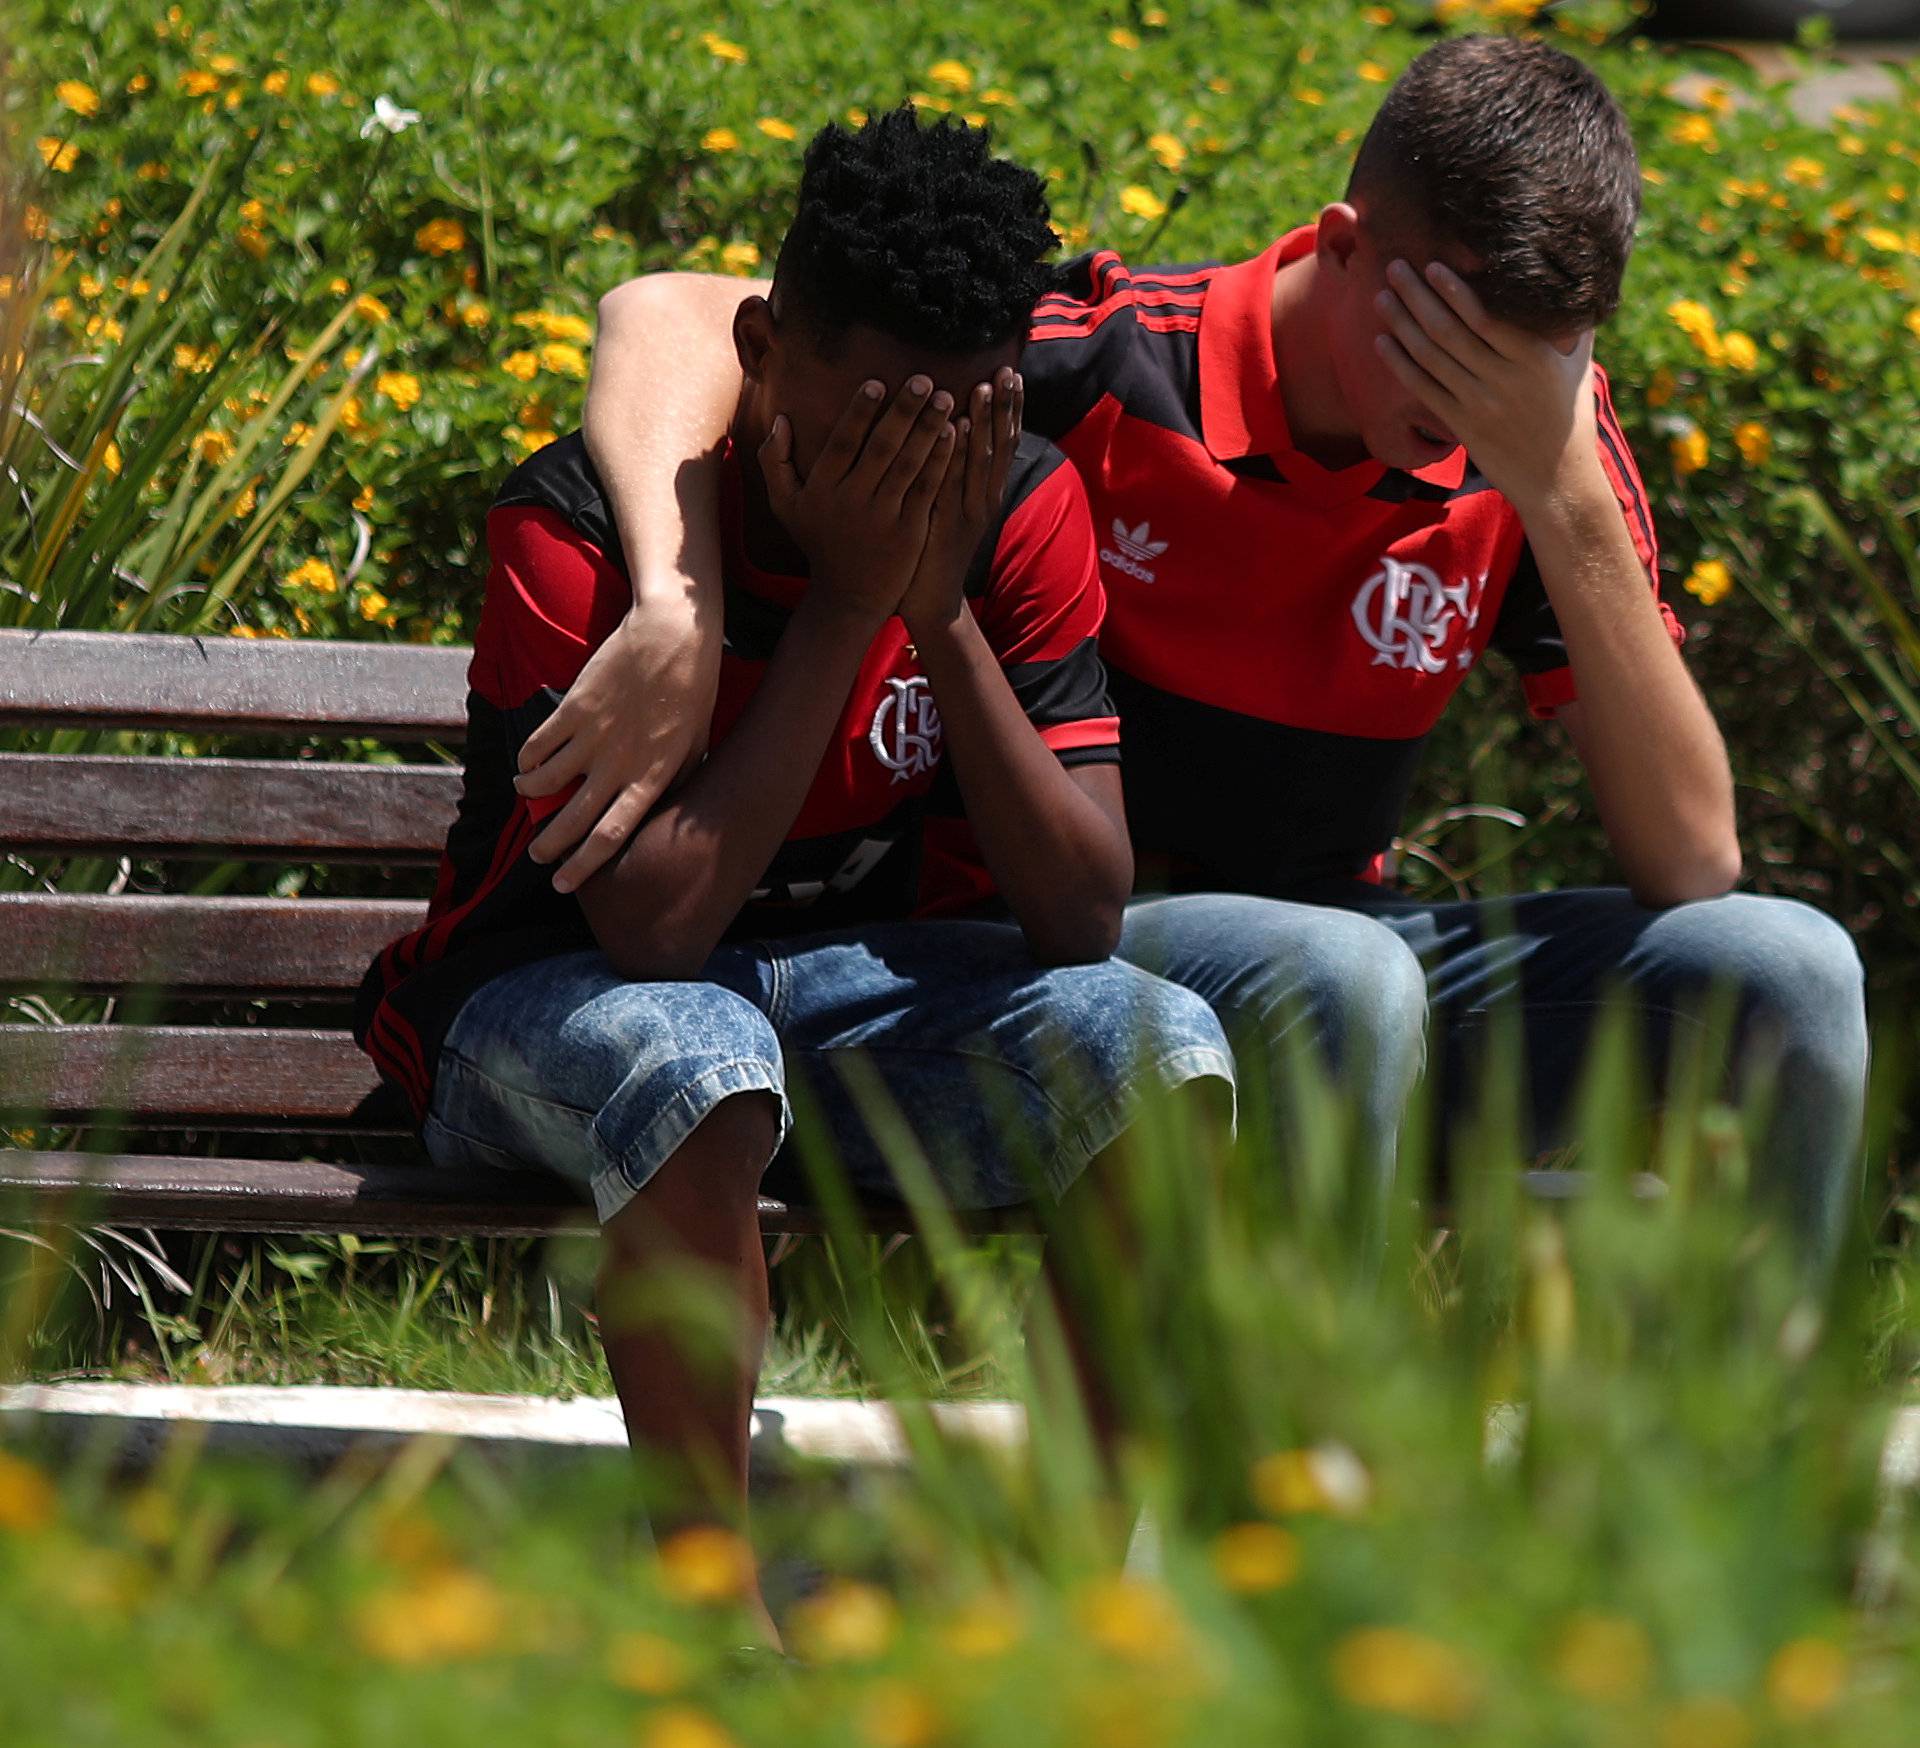 Friends of Vinicius de Barros Silva Freitas, mourn during his burial, after a deadly fire at the Flamengo soccer club's training center, in Volta Redonda